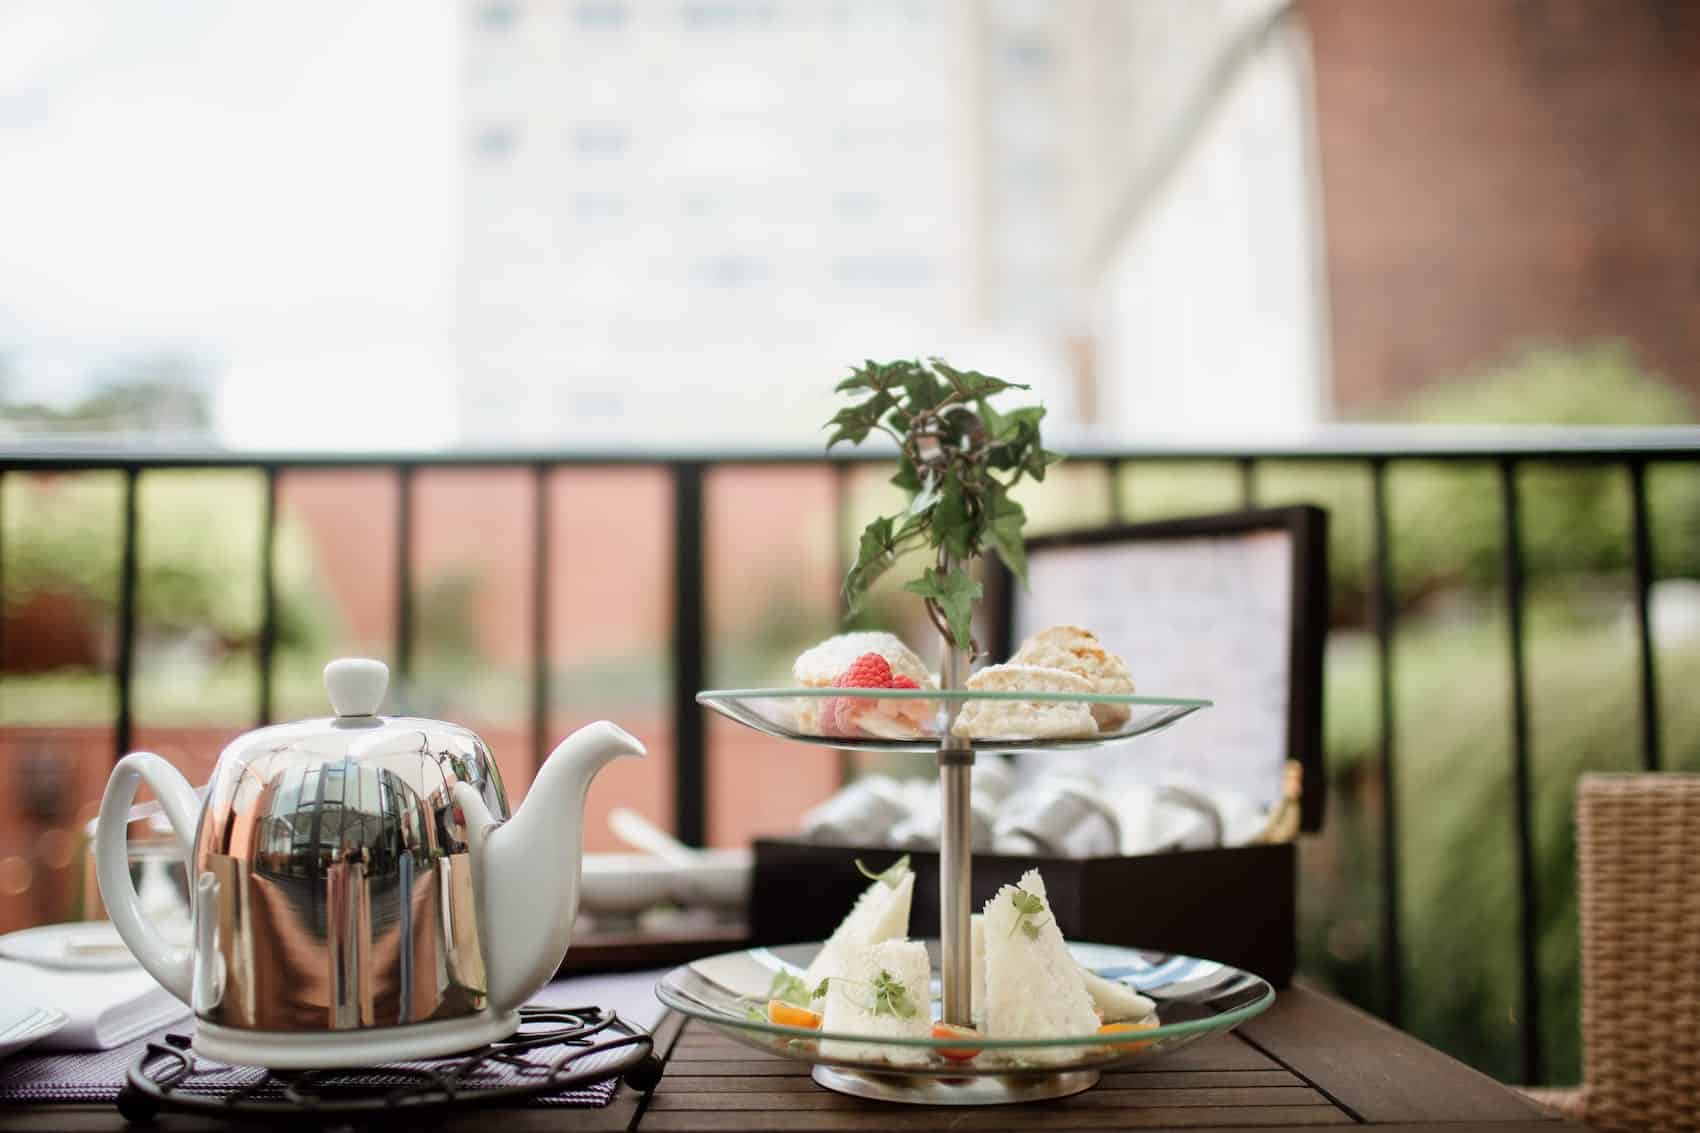 Teapot next to sandwiches on the terrace at The Ivy Hotel.